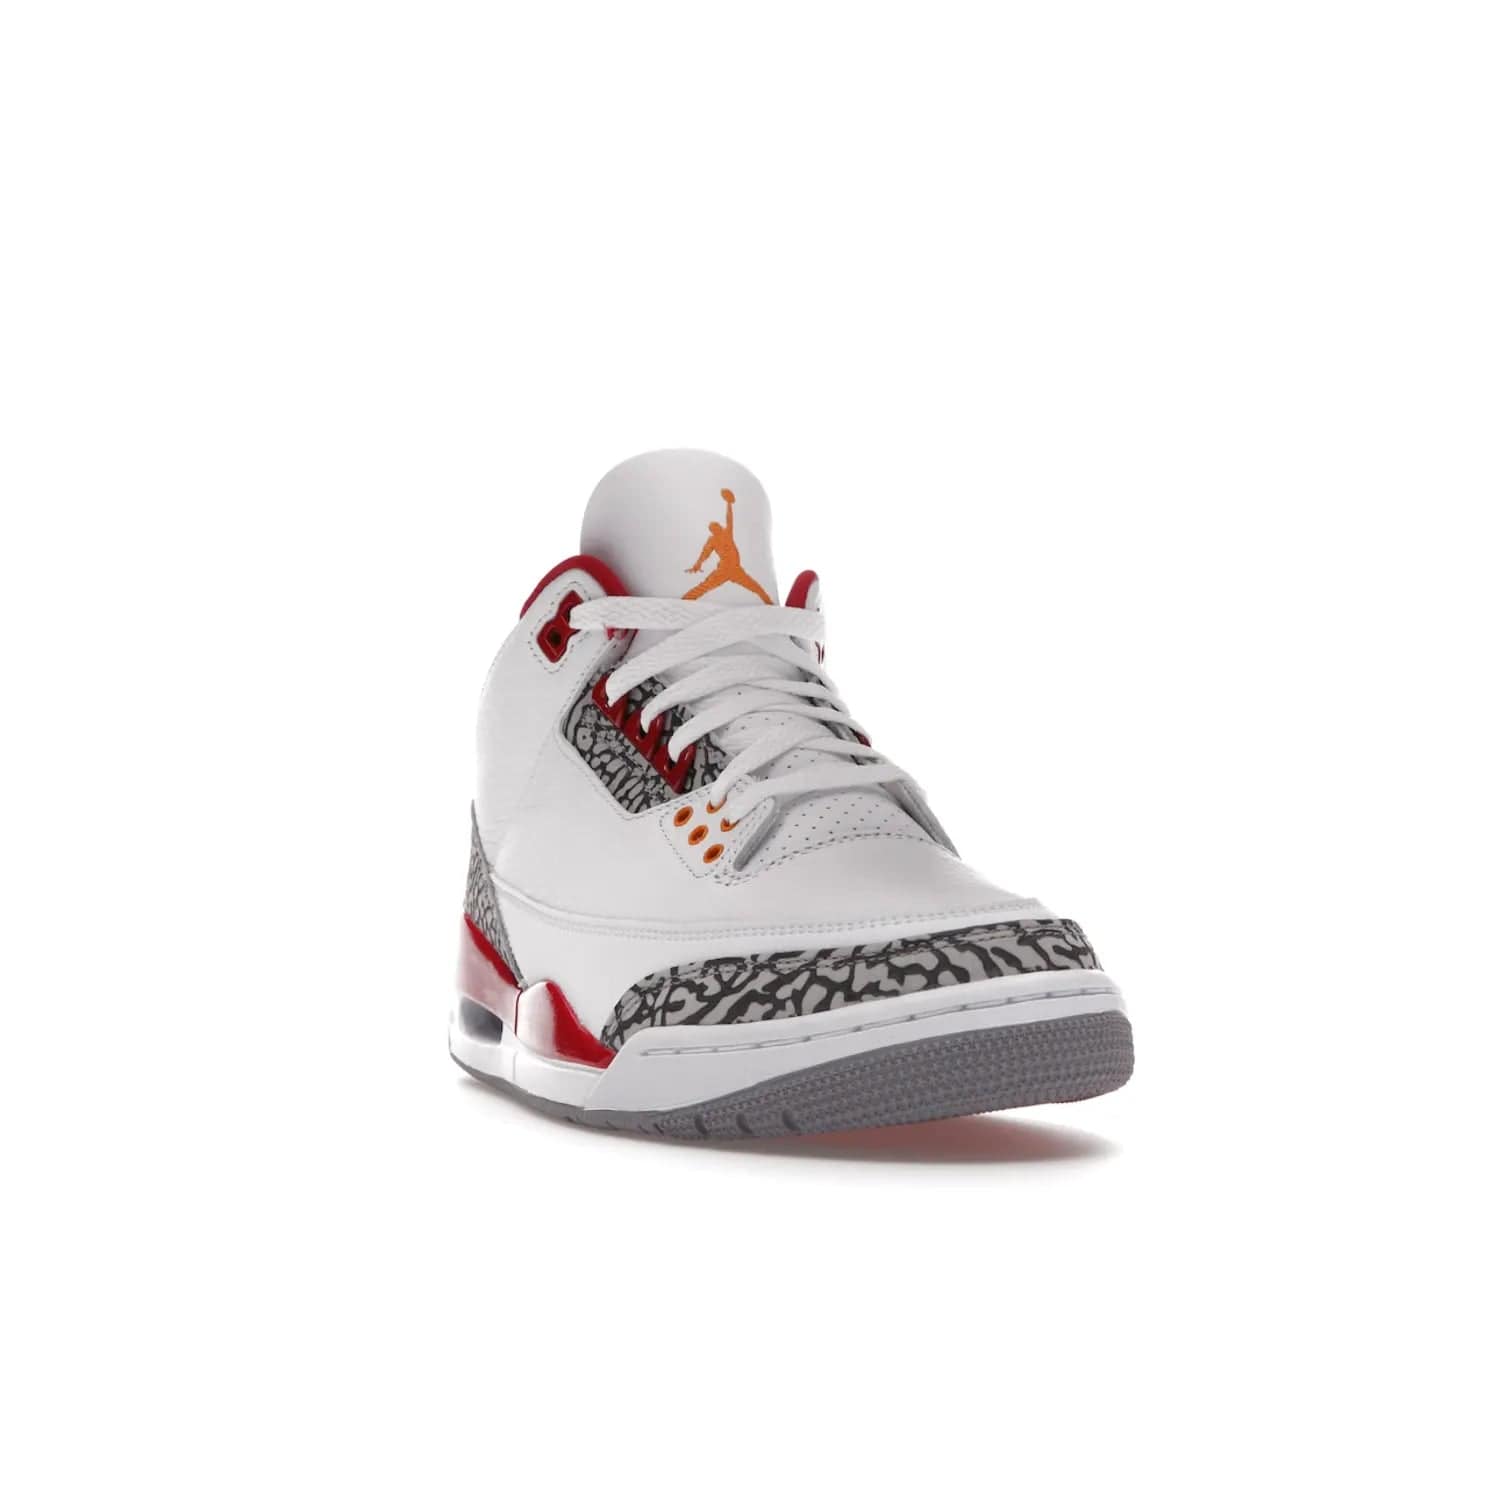 Jordan 3 Retro Cardinal Red - Image 8 - Only at www.BallersClubKickz.com - Air Jordan 3 Retro Cardinal Red combines classic style and modern appeal - white tumbled leather, signature Elephant Print overlays, cardinal red midsoles, Jumpman logo embroidery. Available Feb 2022.